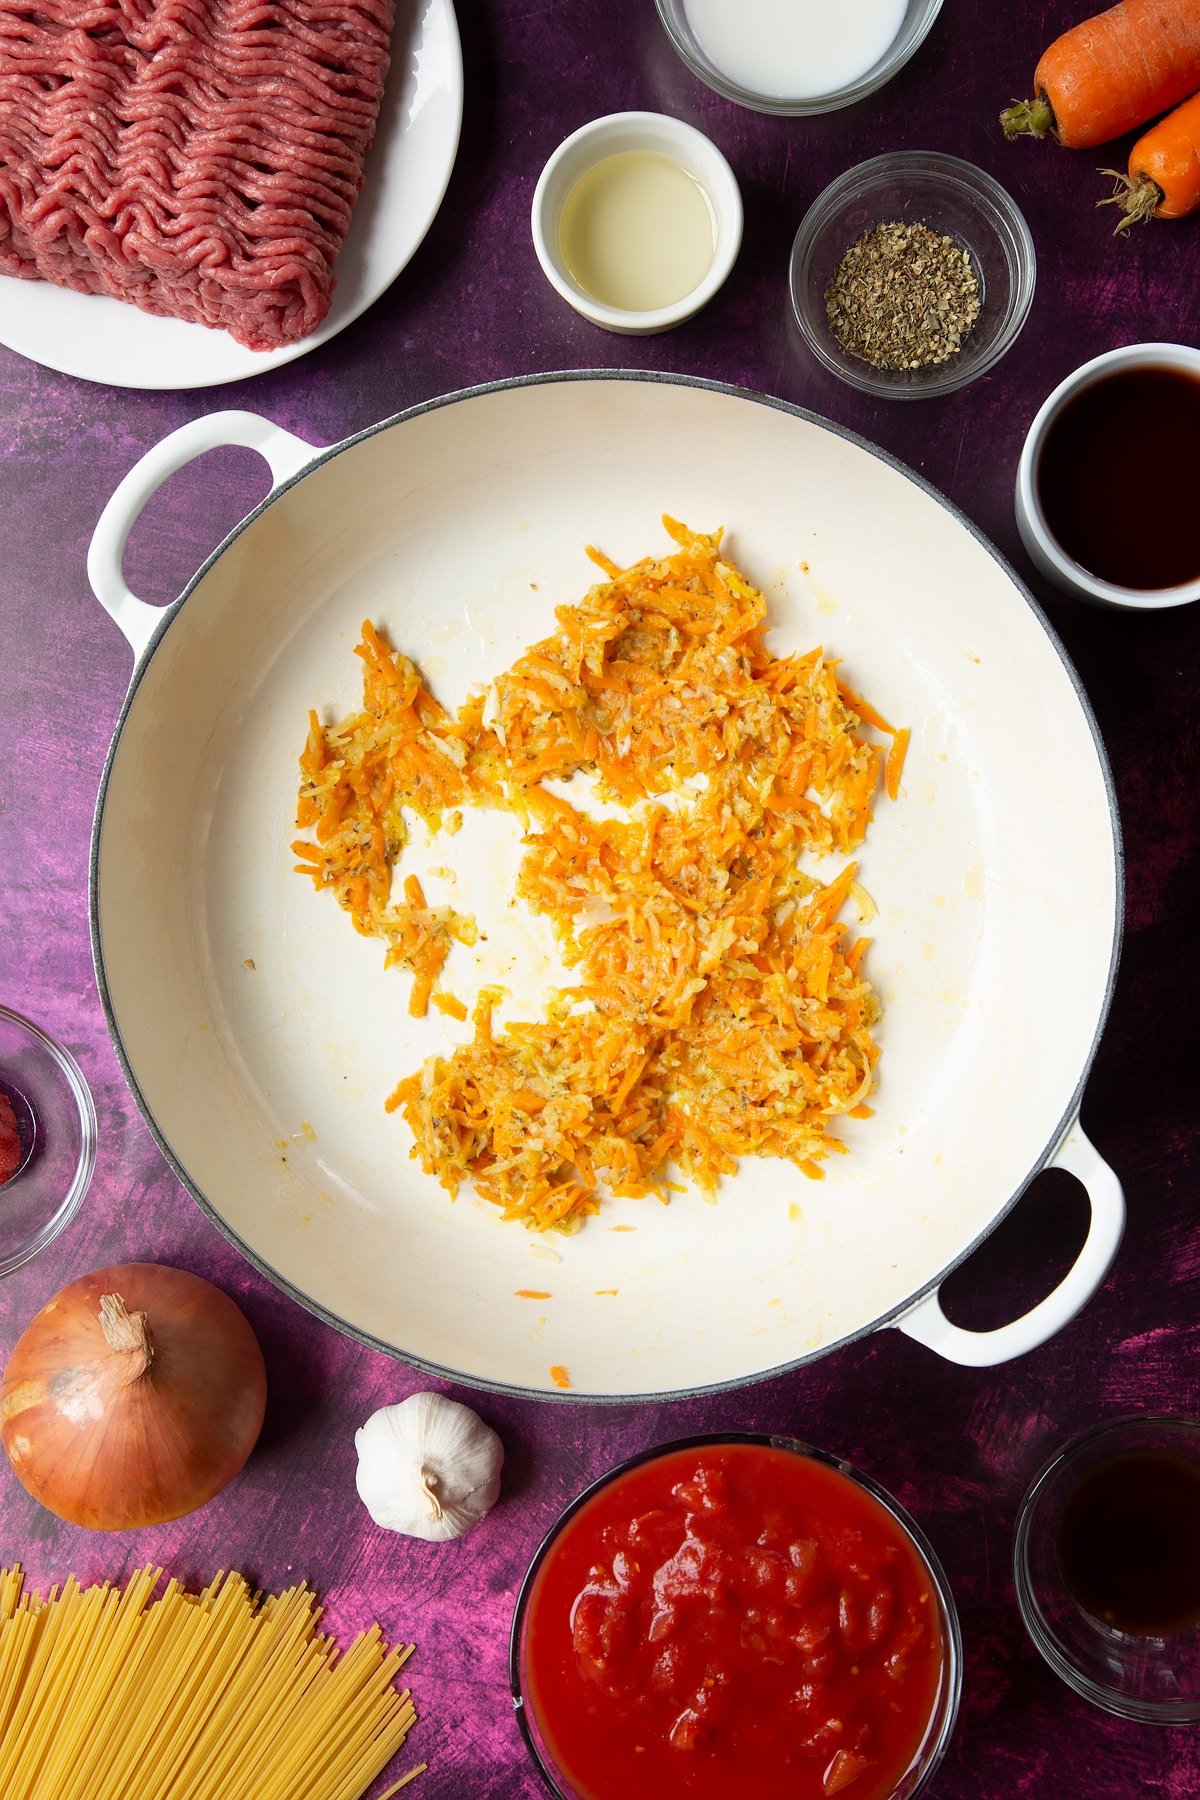 A large frying pan with fried carrot, onion, garlic and dried oregano. Ingredients to make spaghetti bolognese Gordon Ramsay style surround the pan.